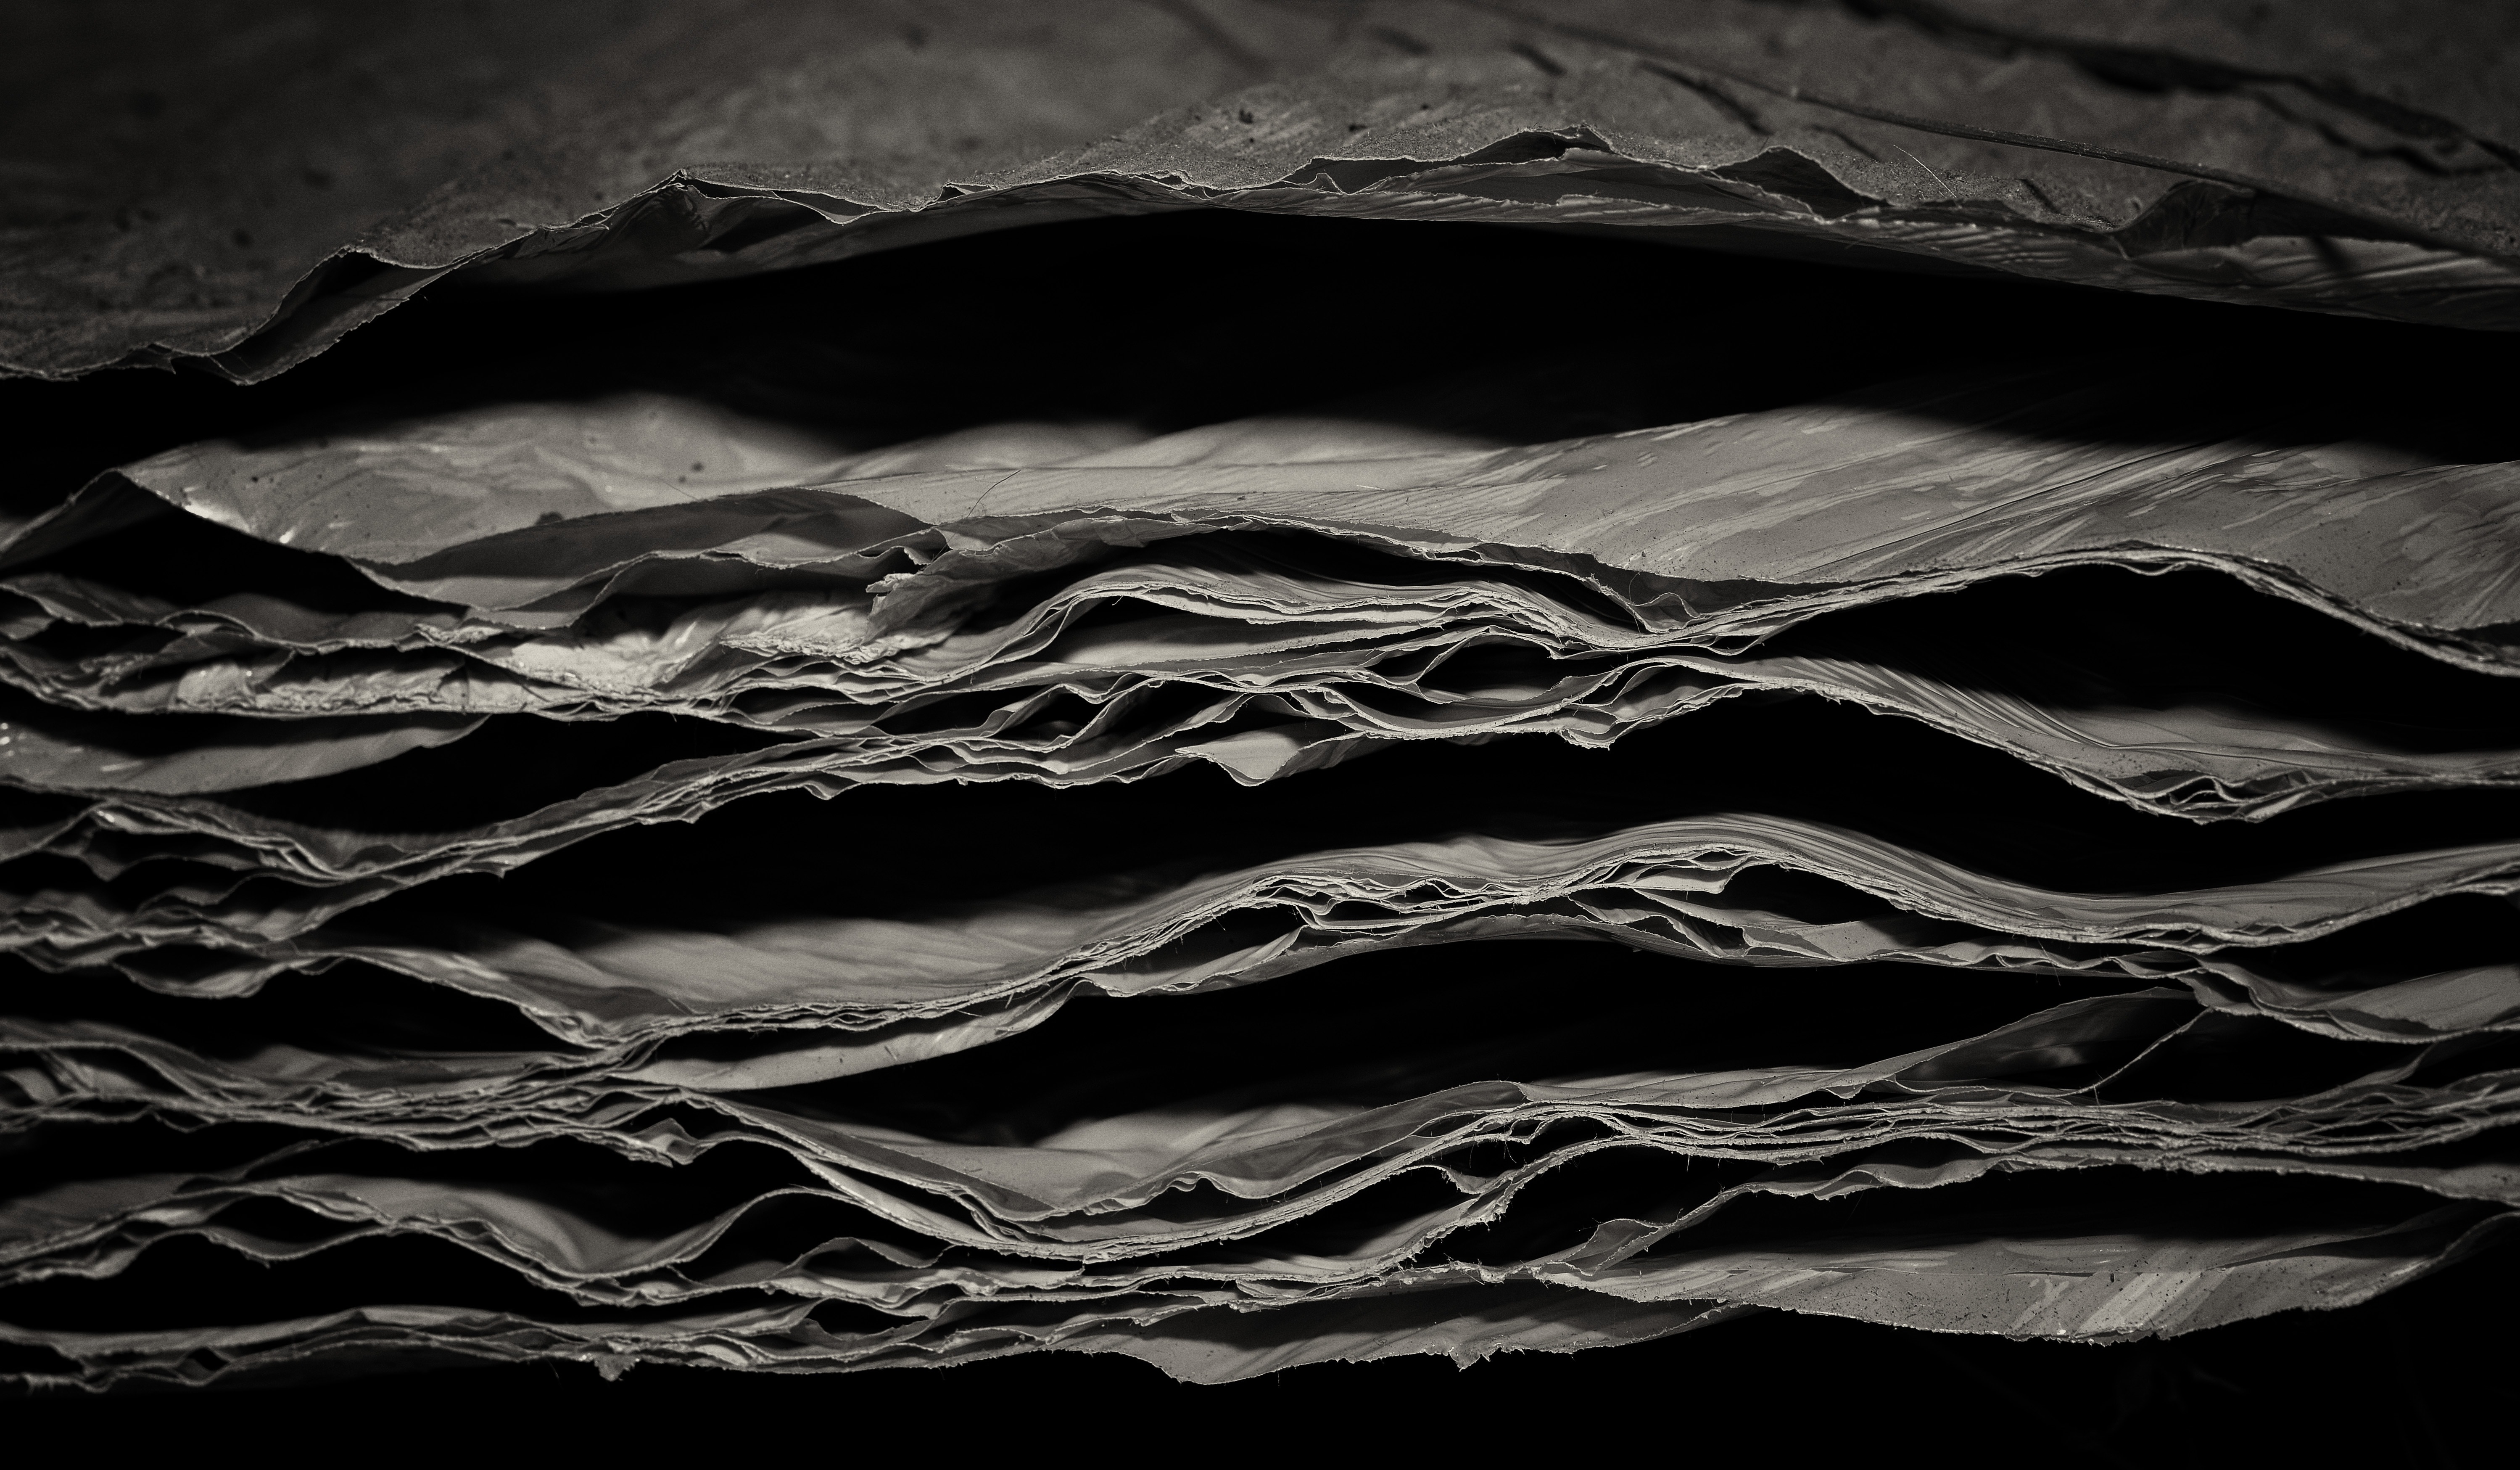 greyscale photo of pile of sheets